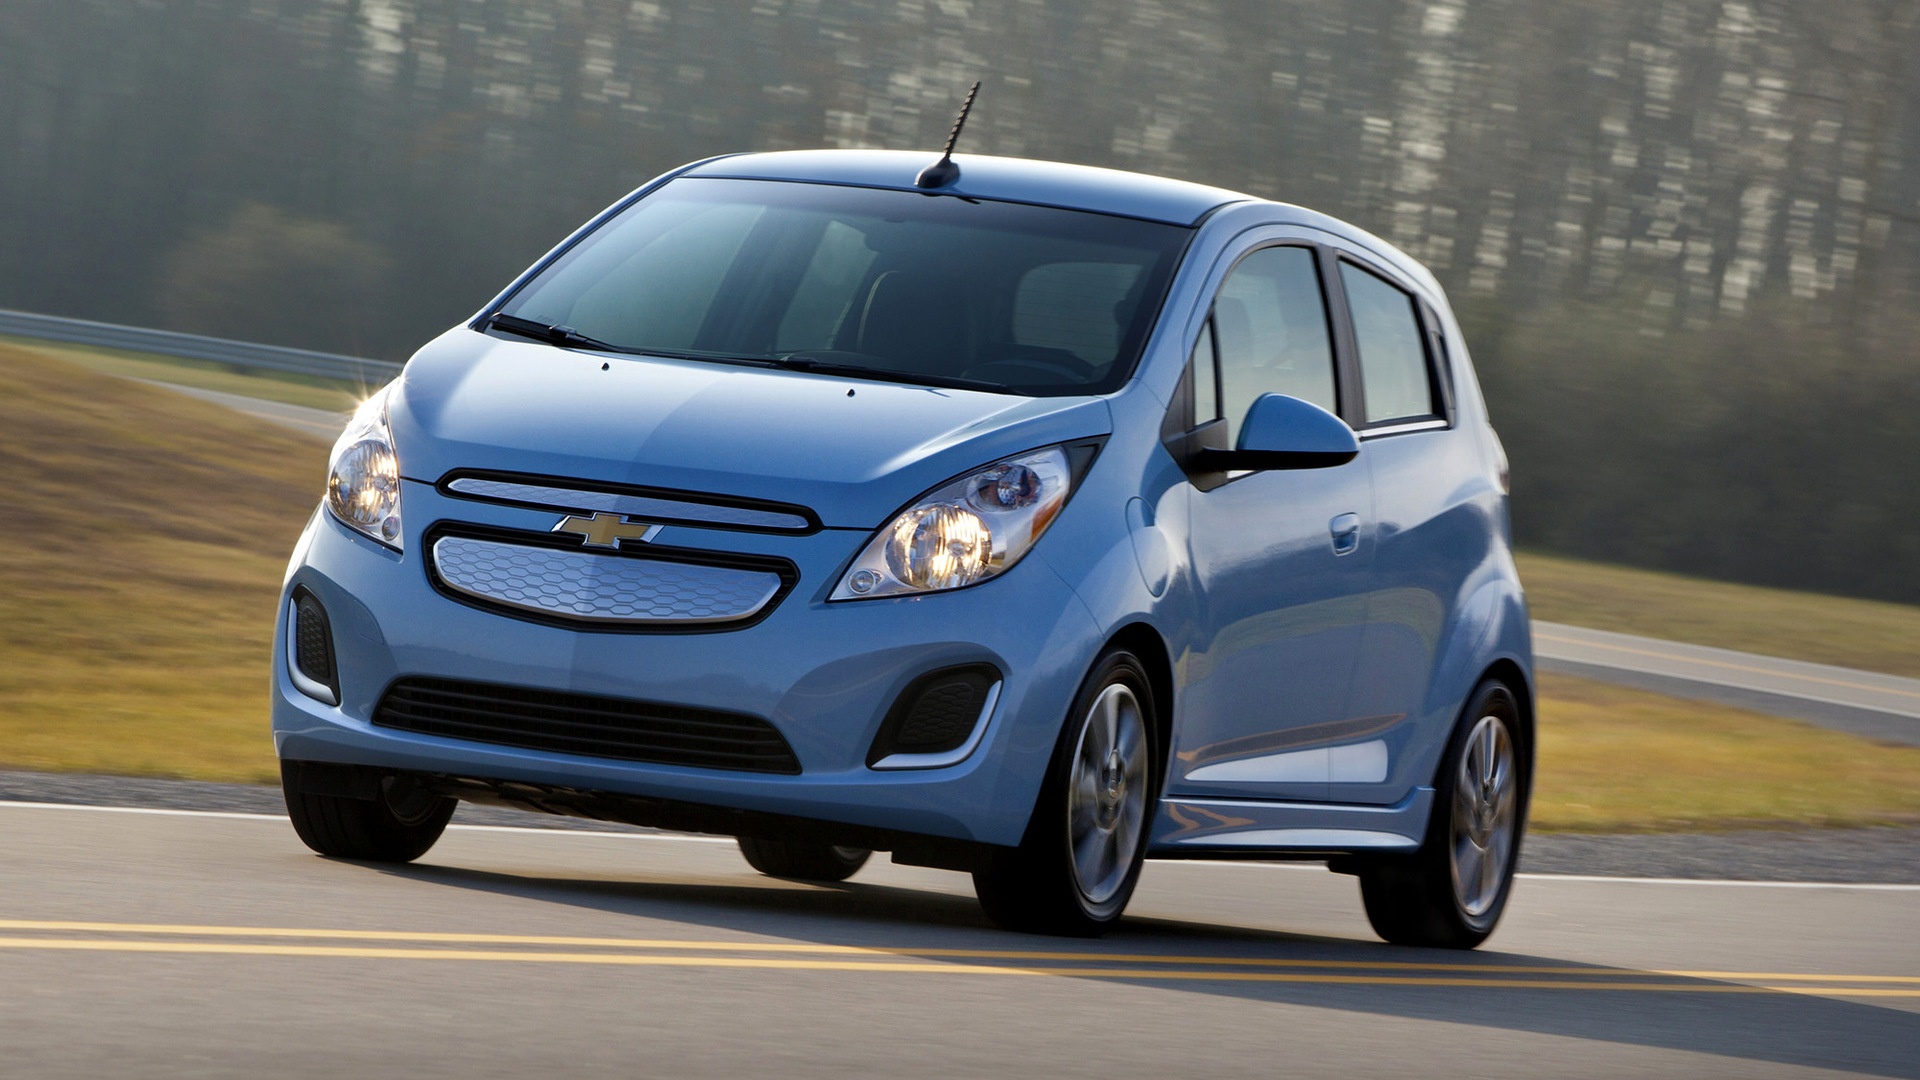 2013 Chevrolet Spark EV - Wallpapers and HD Images | Car Pixel